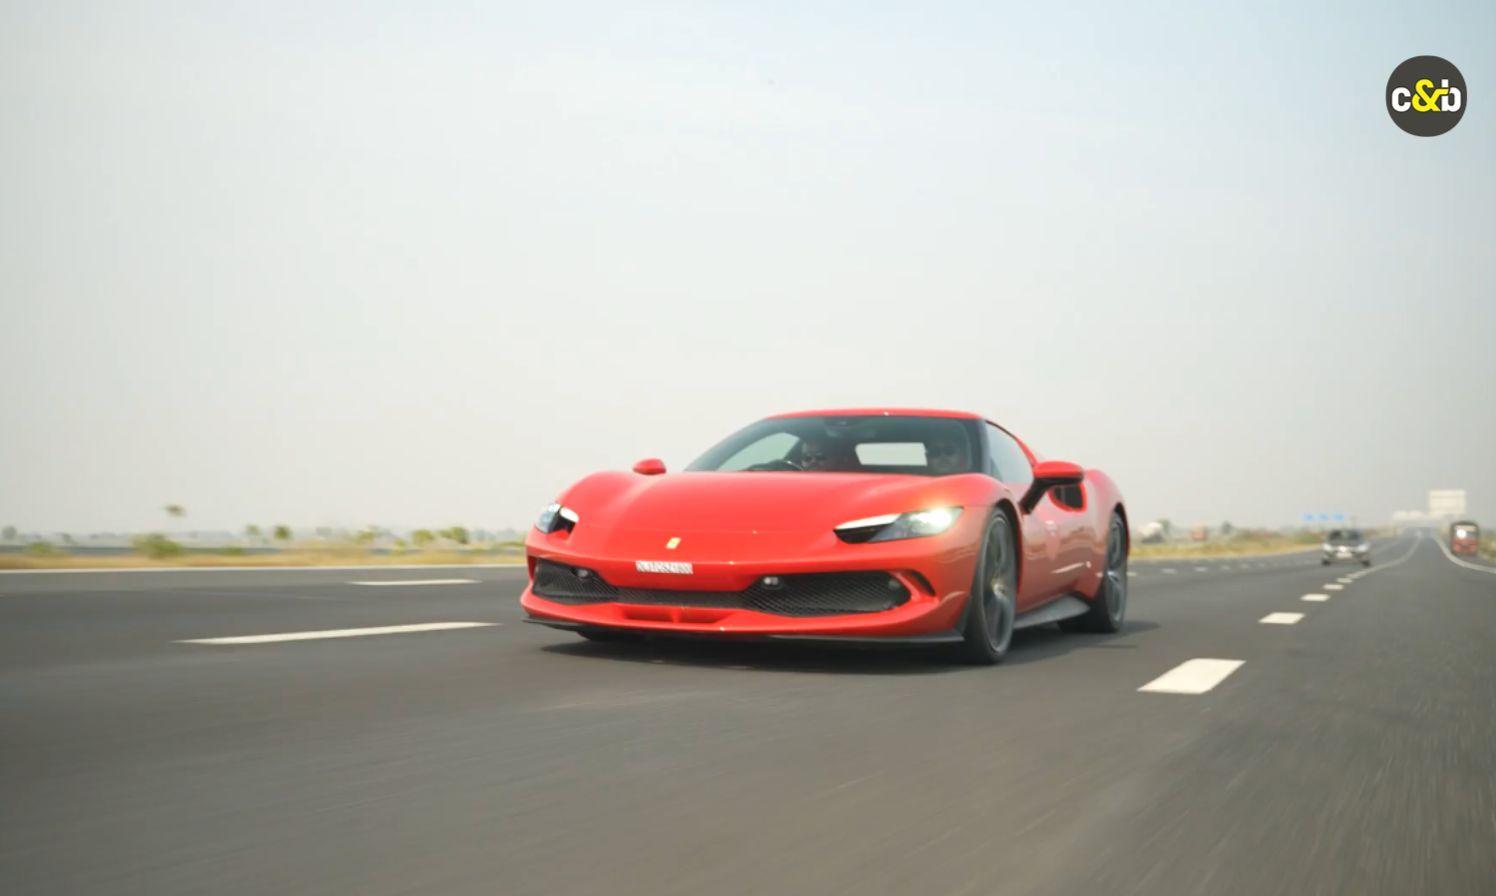 We flew down to Jaipur for the Ferrari Weekender, a meet up of Ferrari owners for a weekend of fun, food and fast cars